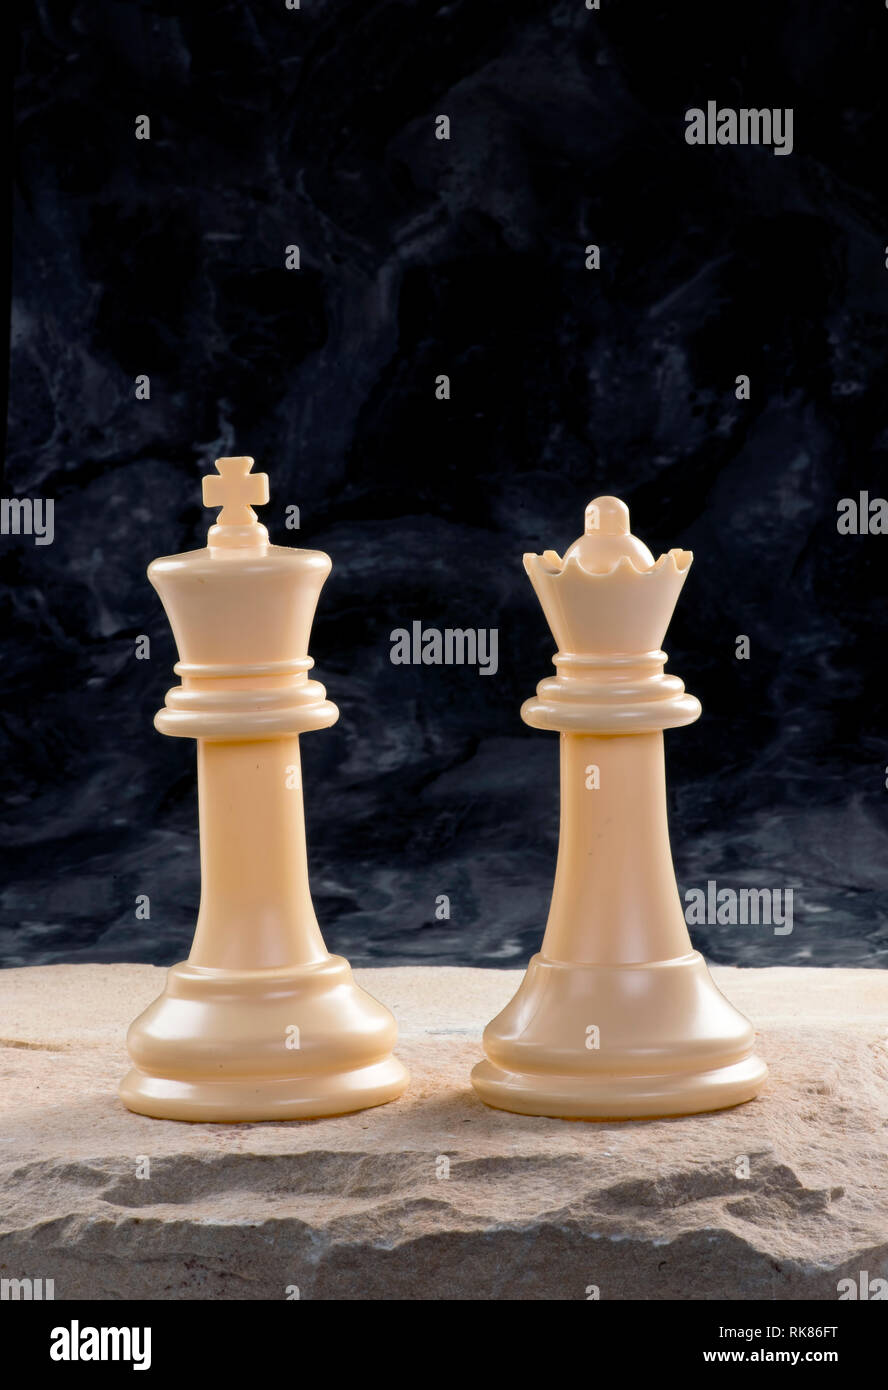 Chess King and his Queen. Stock Photo